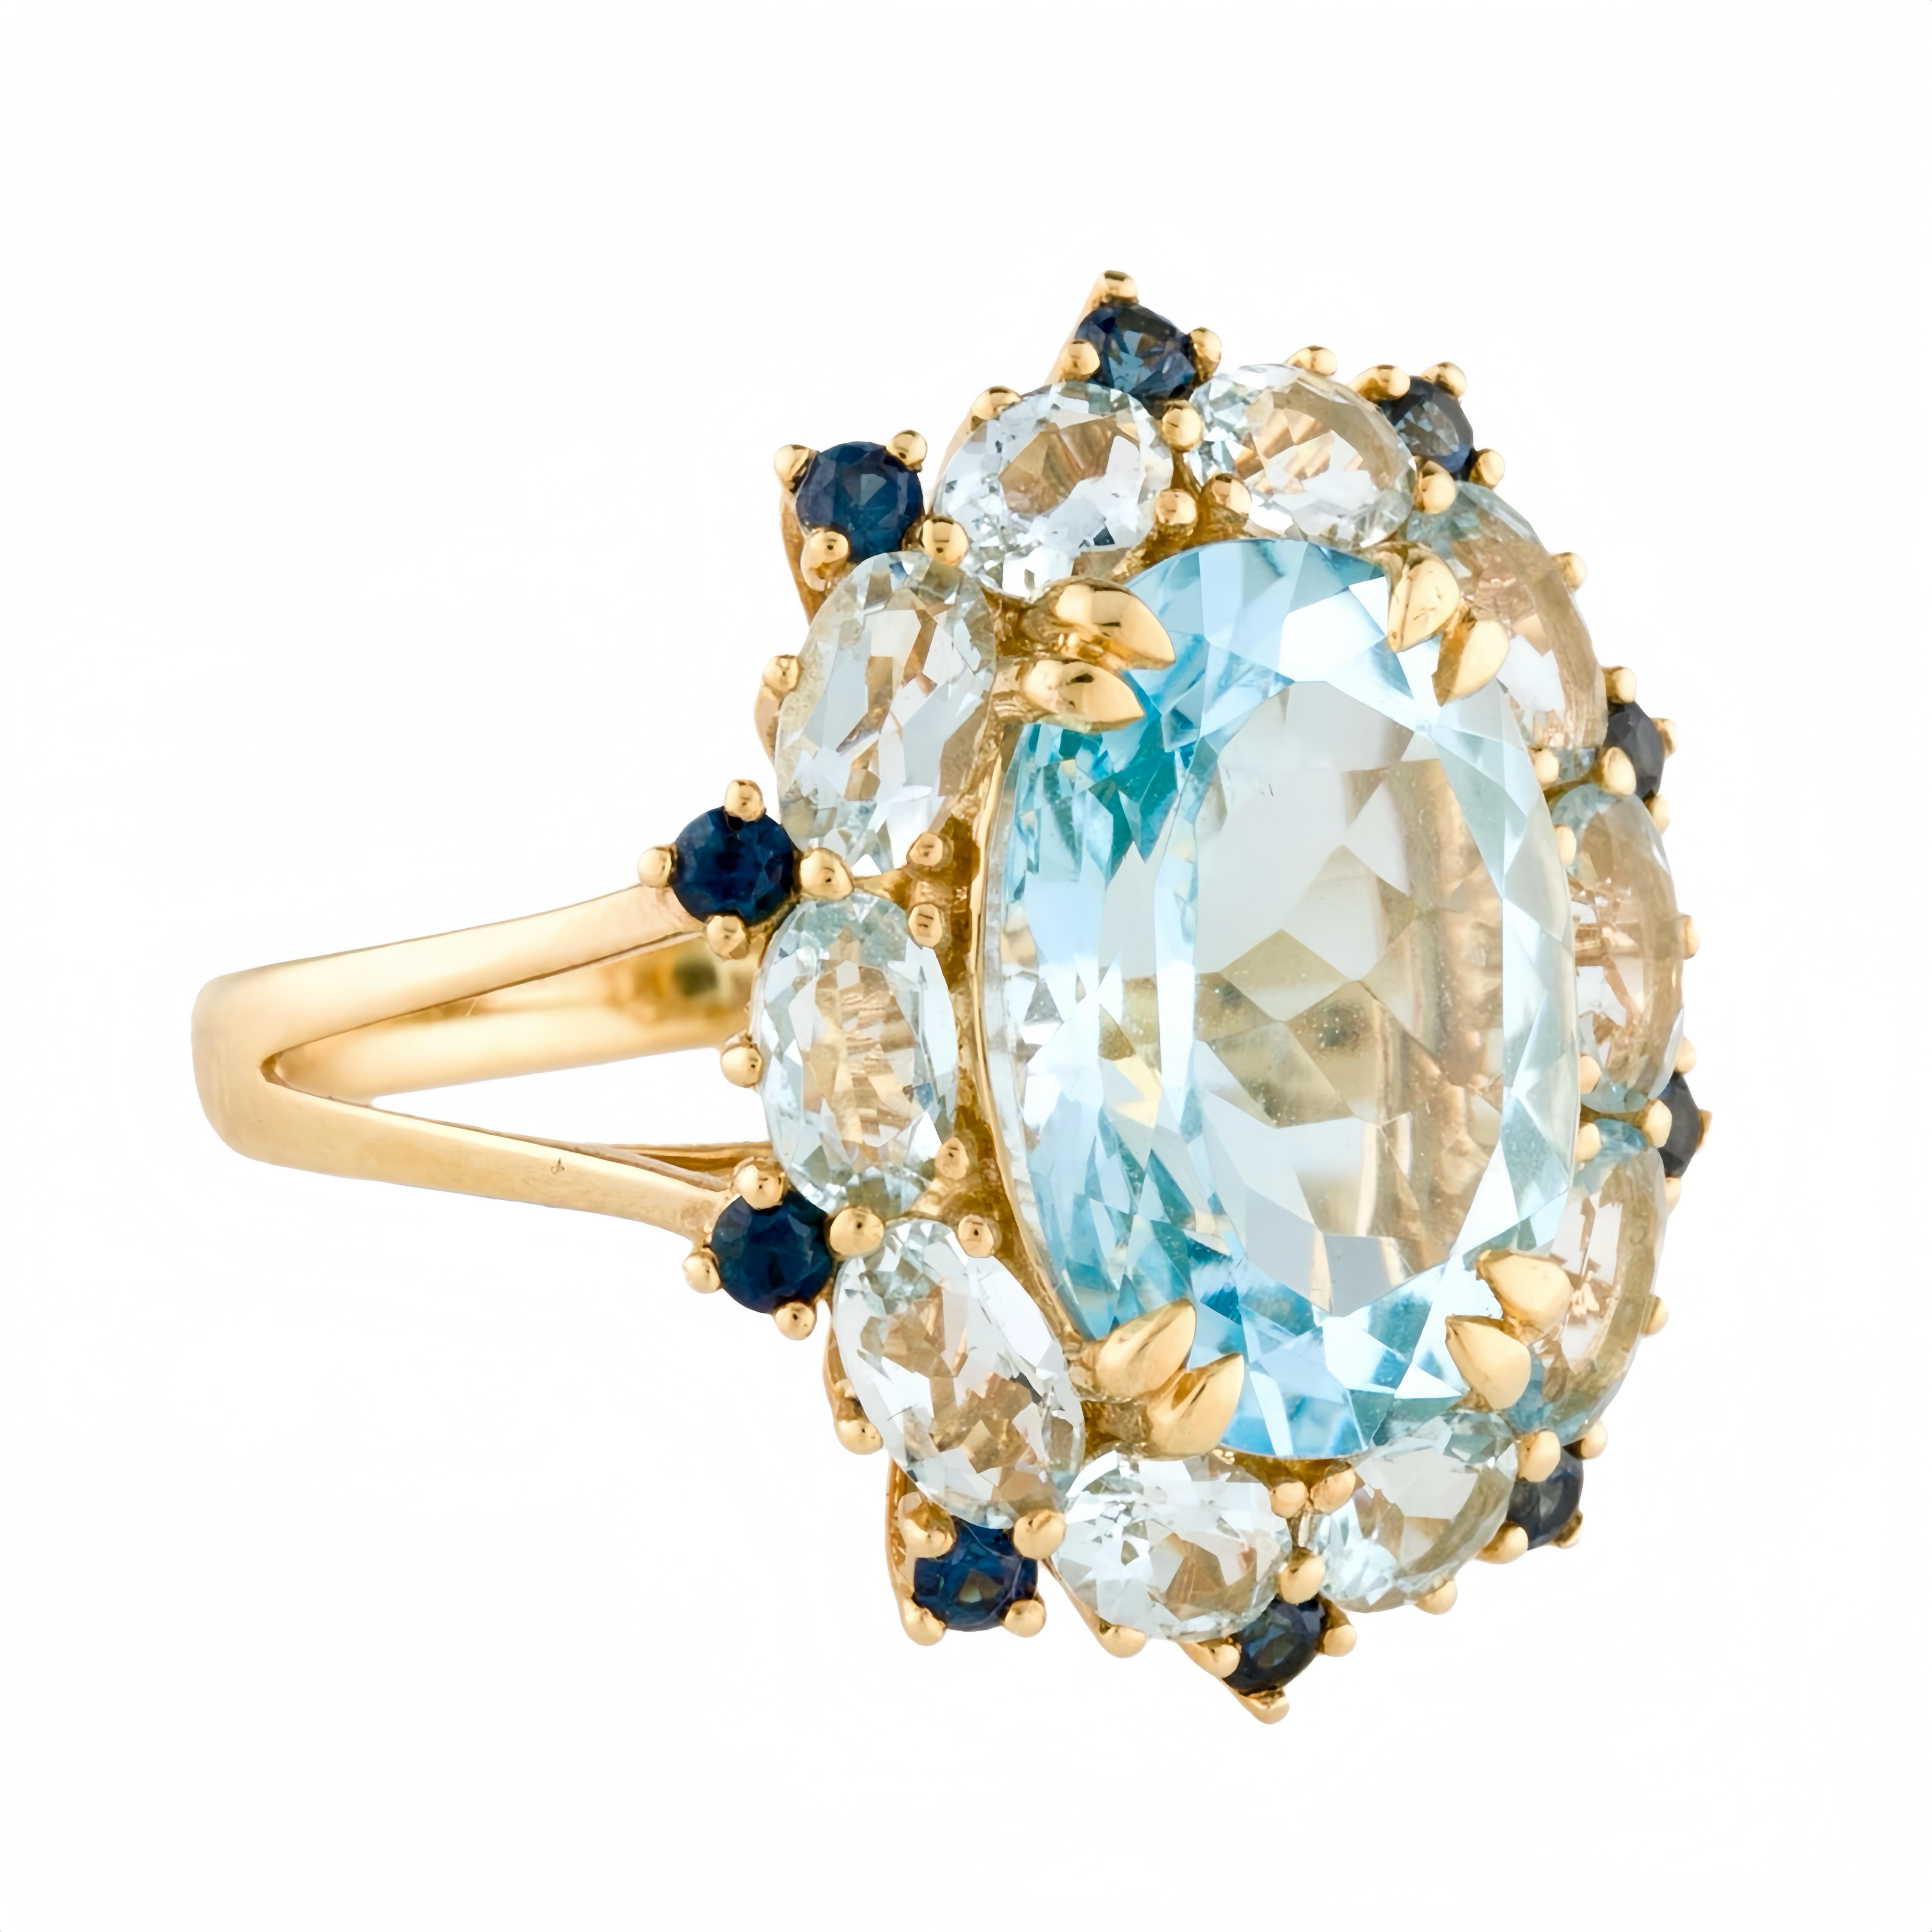 Discover Kai Blue Topaz Aquamarine Sapphire Cluster Cocktail Ring in 14k yellow gold, a true masterpiece of elegance and sophistication. This exquisite piece of jewelry showcases a stunning 7.20-carat topaz at its center, radiating a mesmerizing